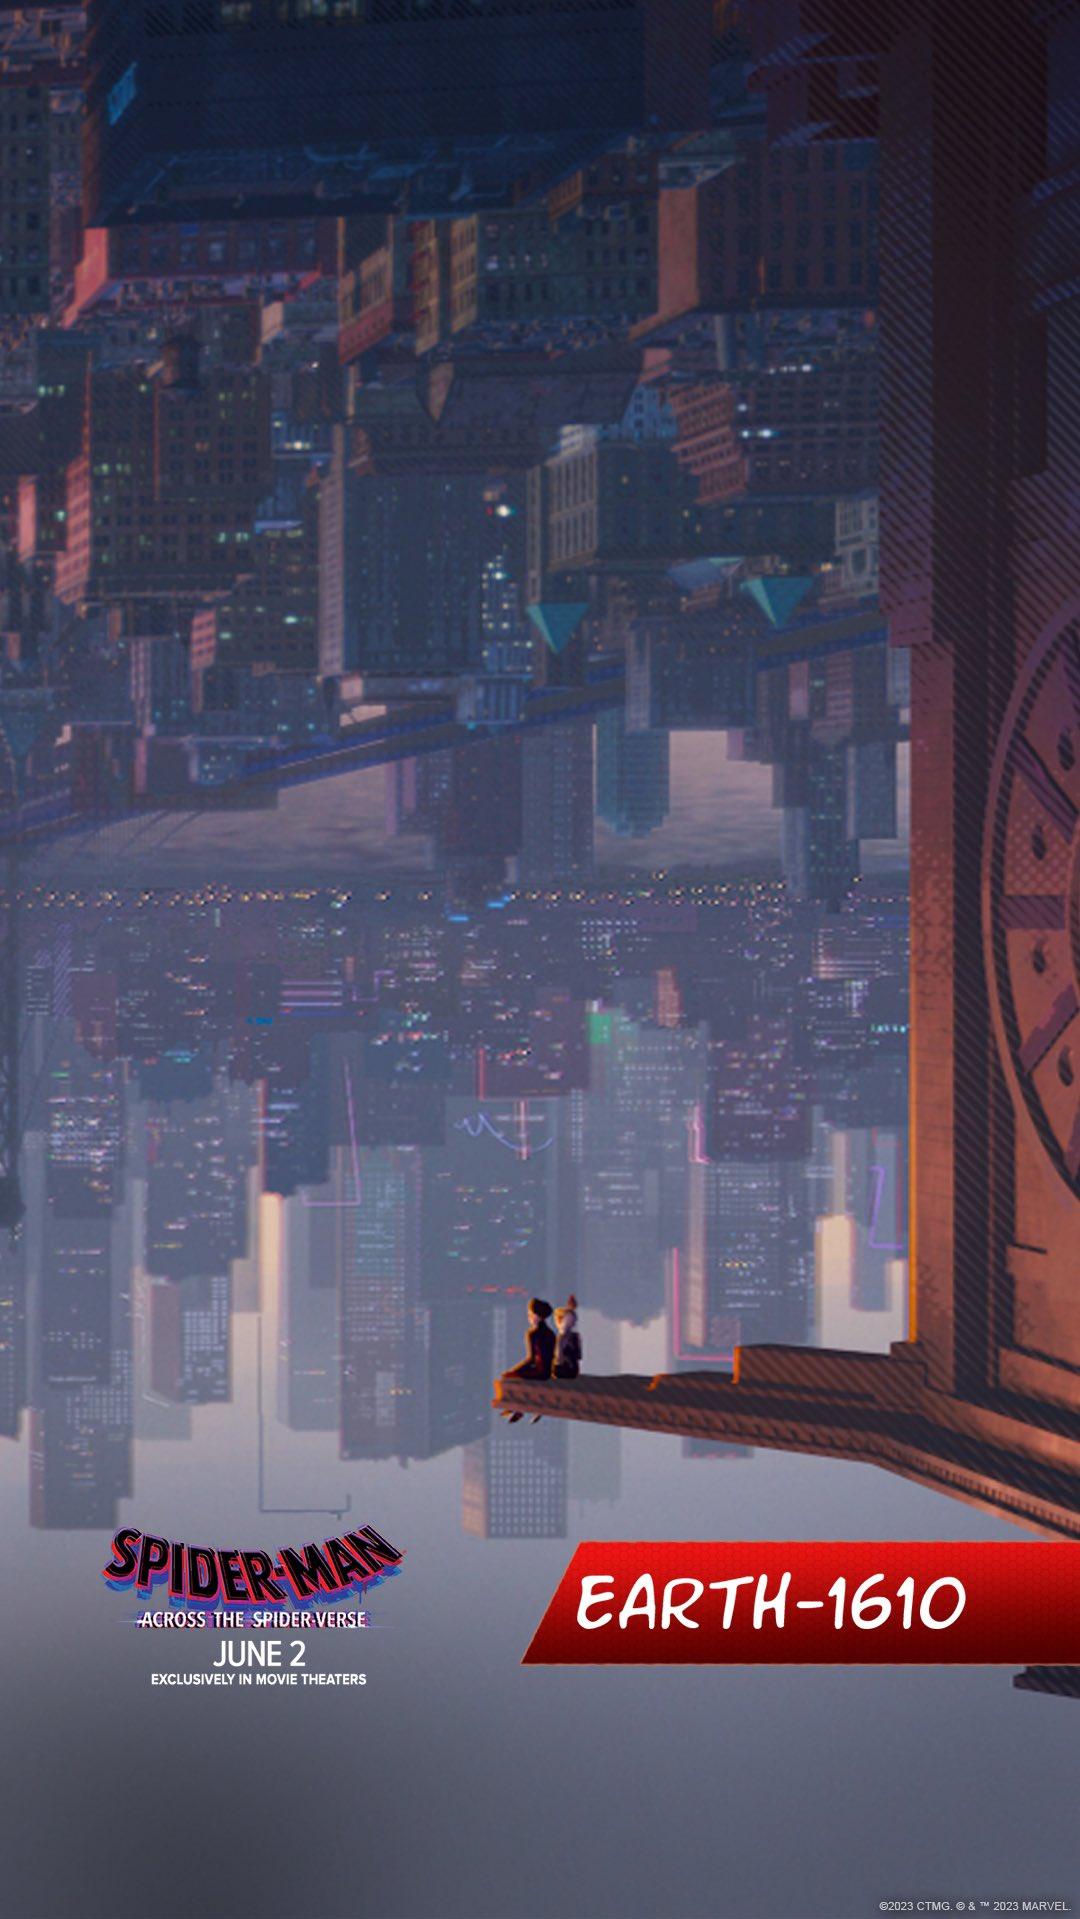 1377478 spider-man 2099, across the spider-verse, 4k - Rare Gallery HD  Wallpapers